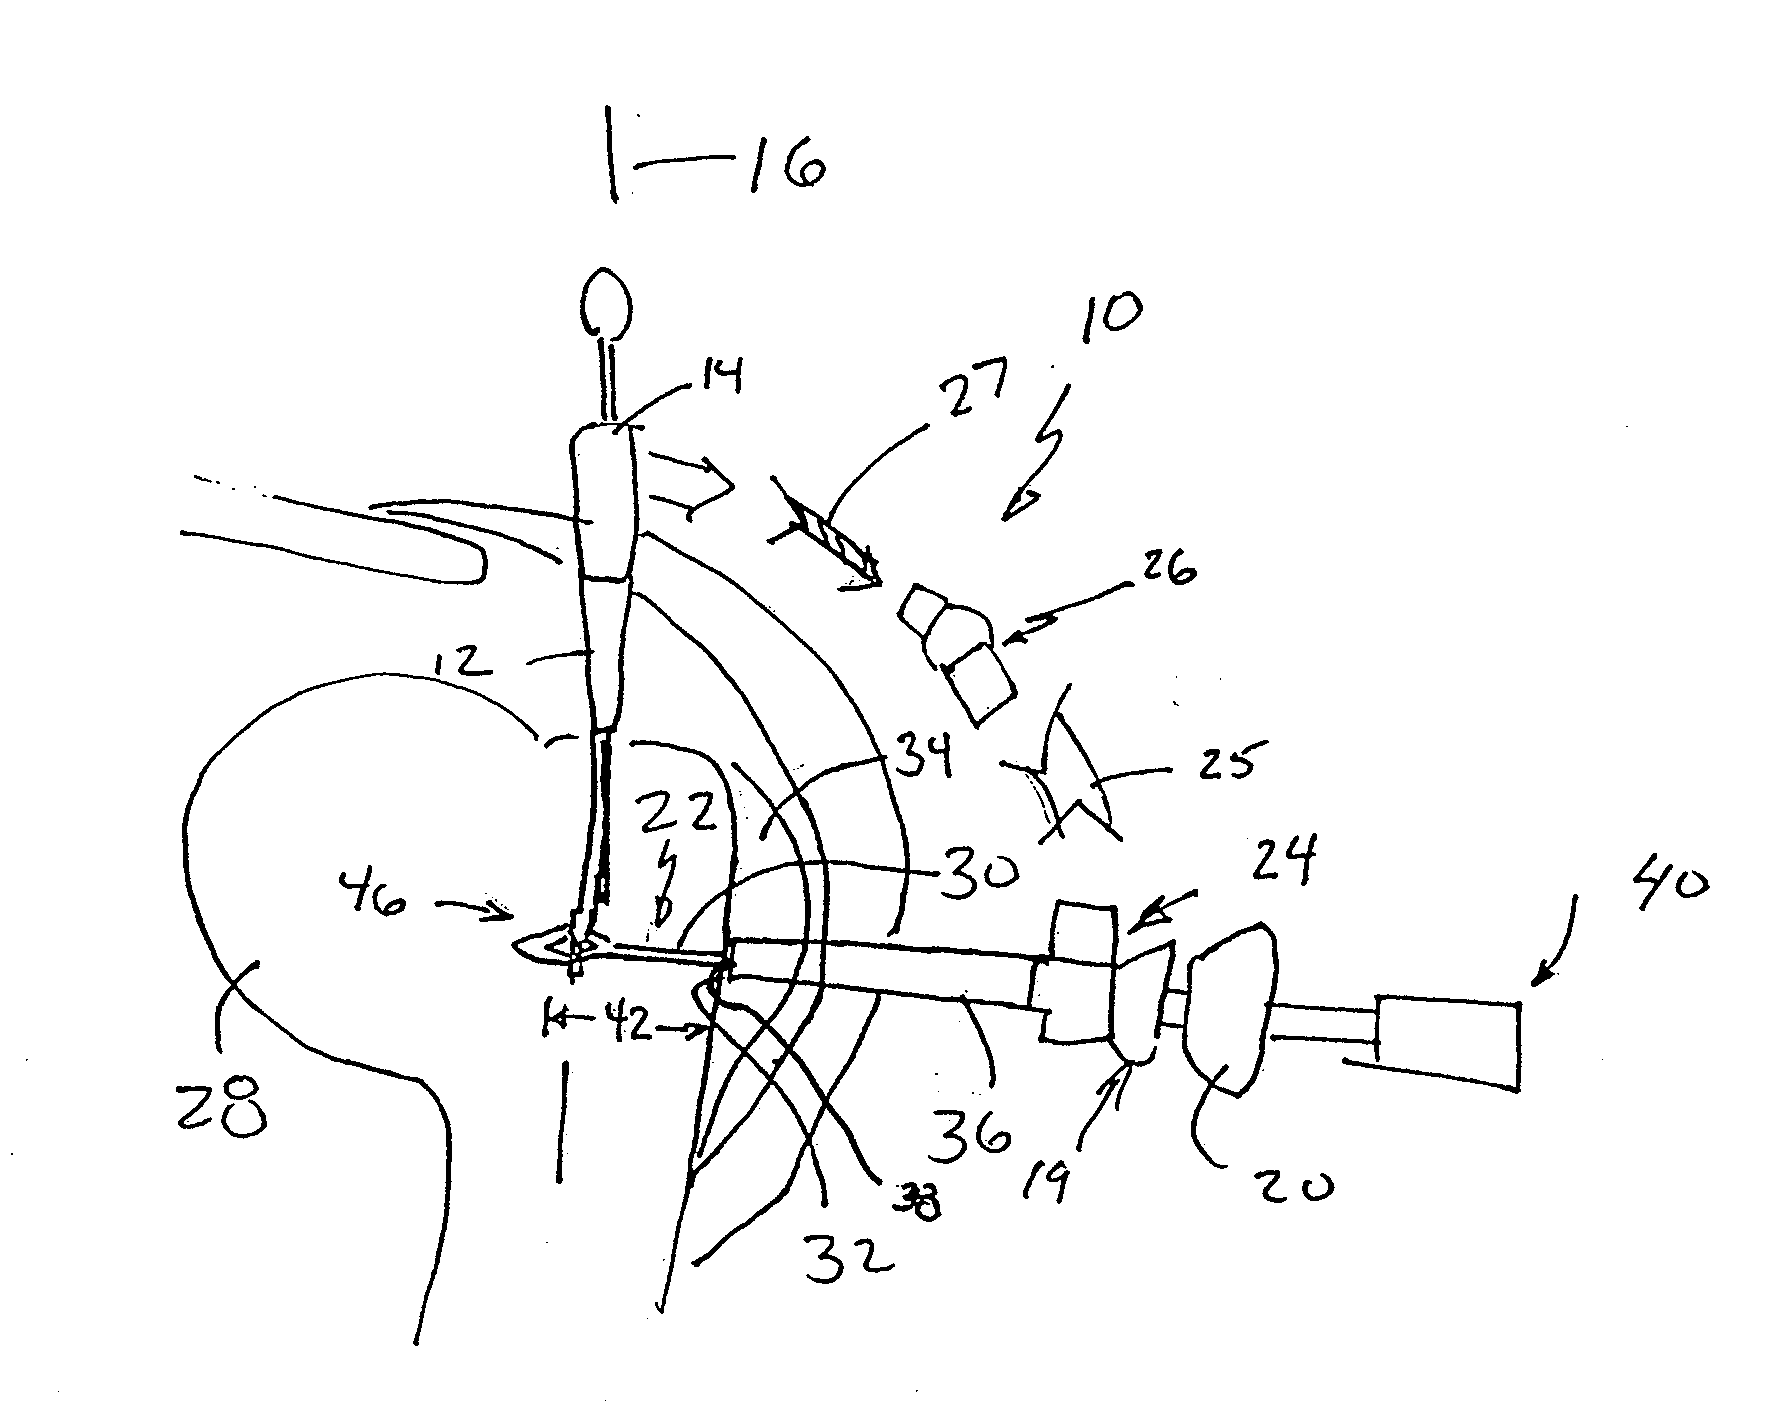 Surgical Drill Guide With Awl and Method of Use